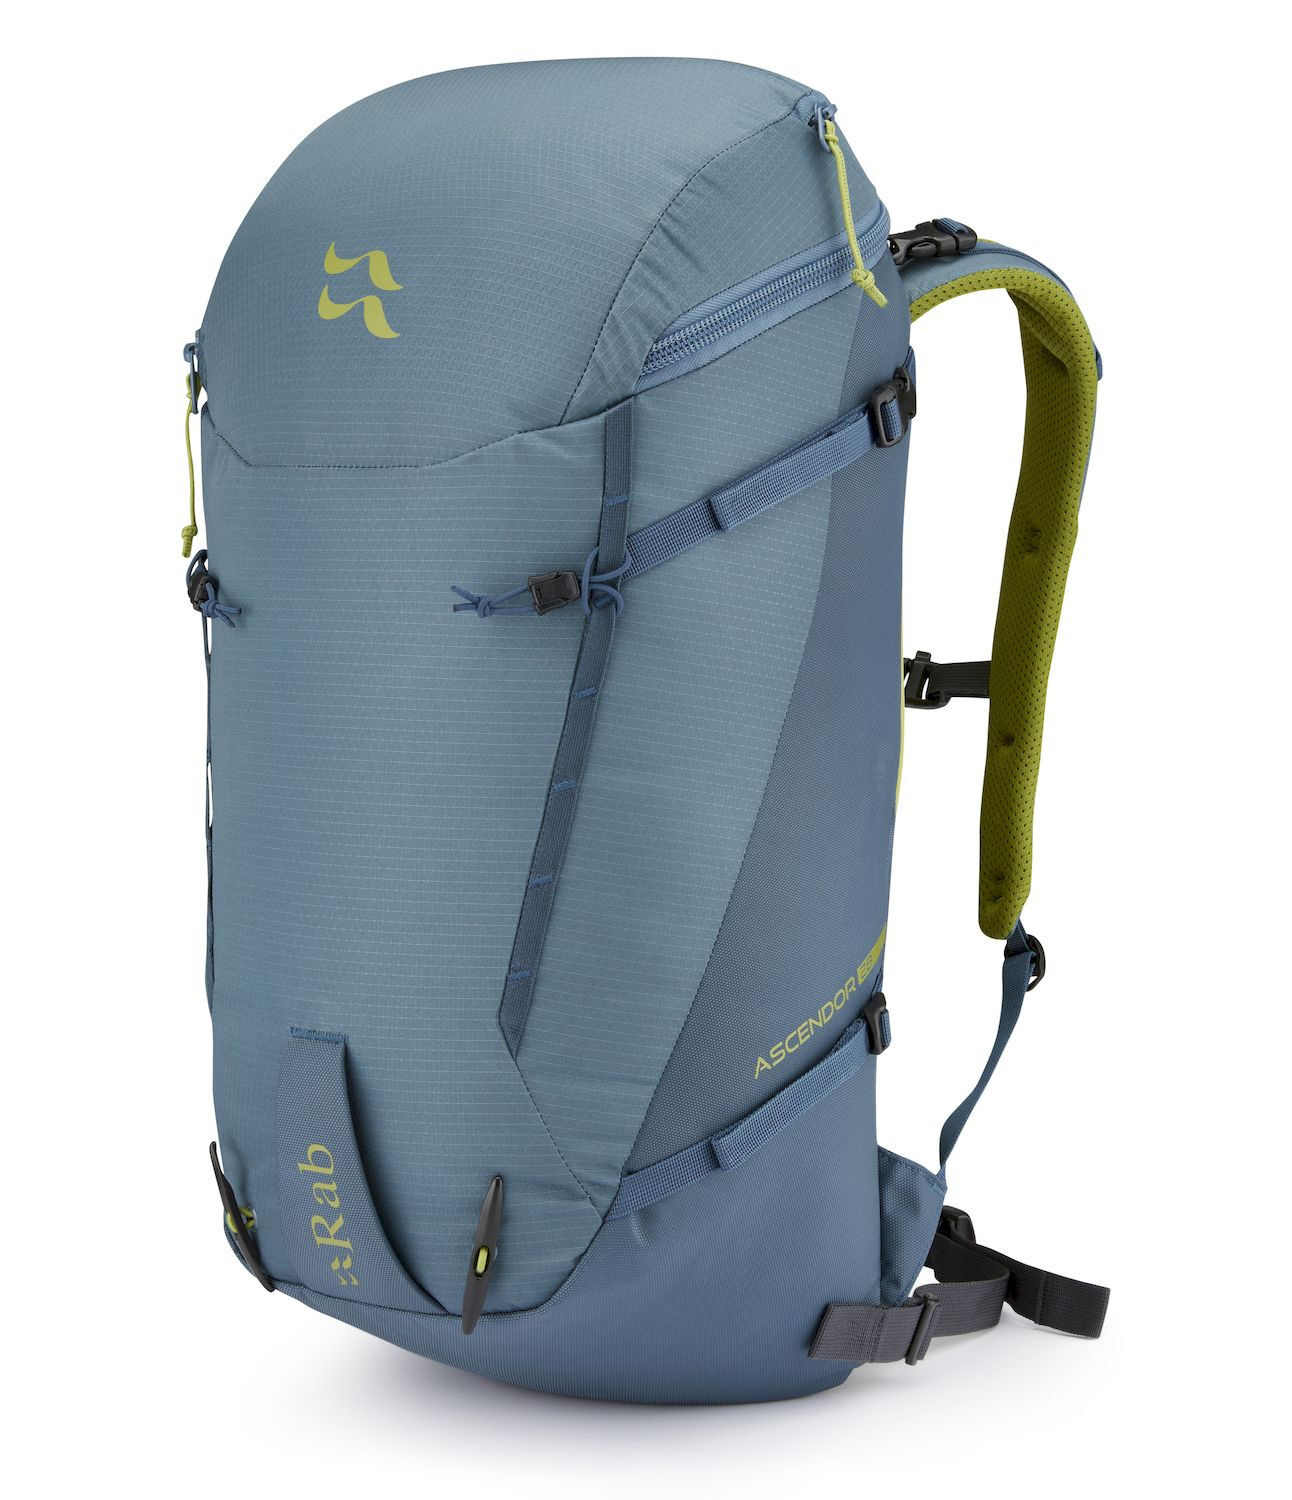 Rab Ascendor 28 - Mountaineering backpack